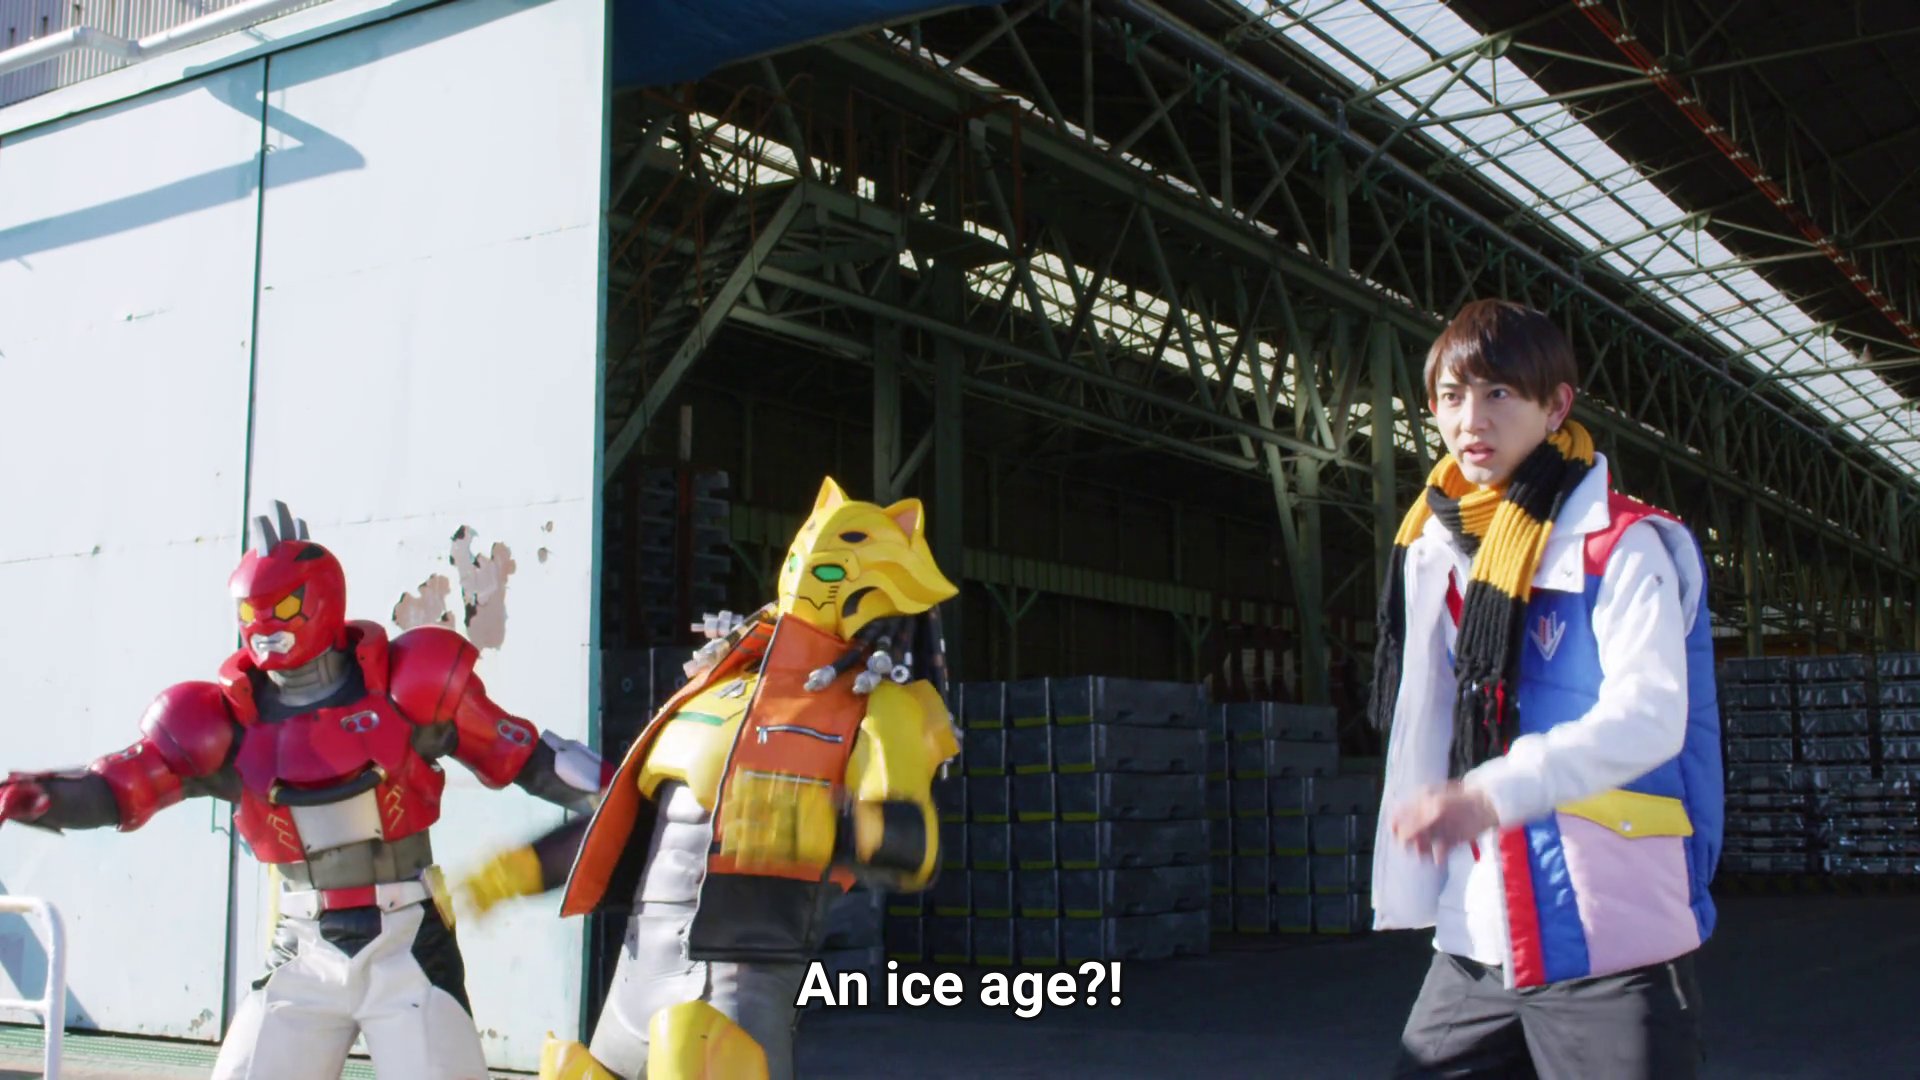 Kaito, wearing a scarf, with Gaon and Zyuran leaning like they're sliding beside him.  Subtitles: An ice age?!